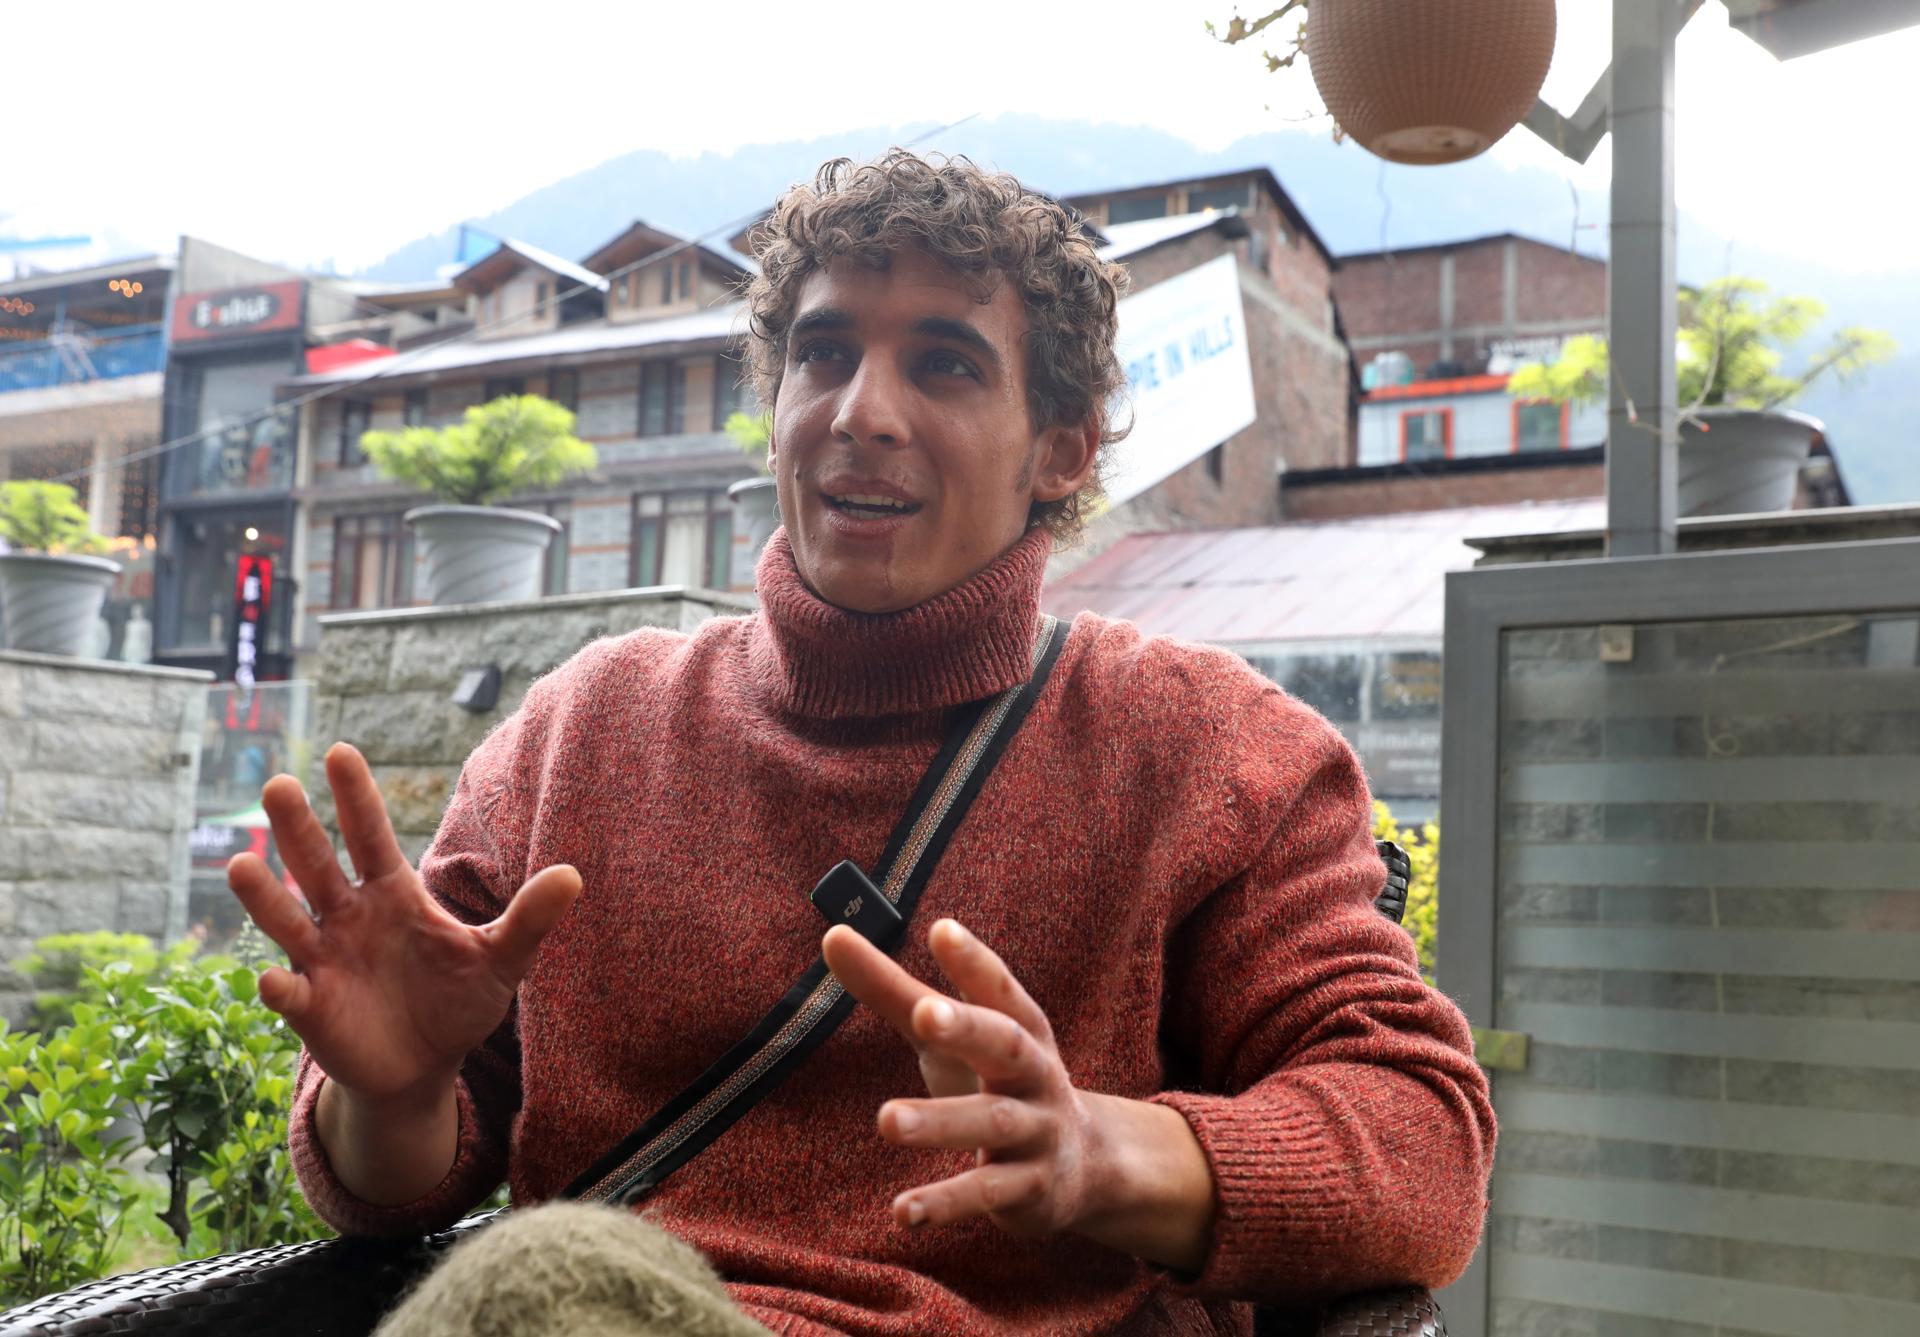 Spanish actor Miguel Herran (C) speaks during an interview at the shooting of the movie 'Valle de Sombras' (Valley of Shadows) at a market in Manali, Himachal Pradesh, India, 18 May 2023 (Issued 25 May 2023). EFE/EPA/RAJAT GUPTA